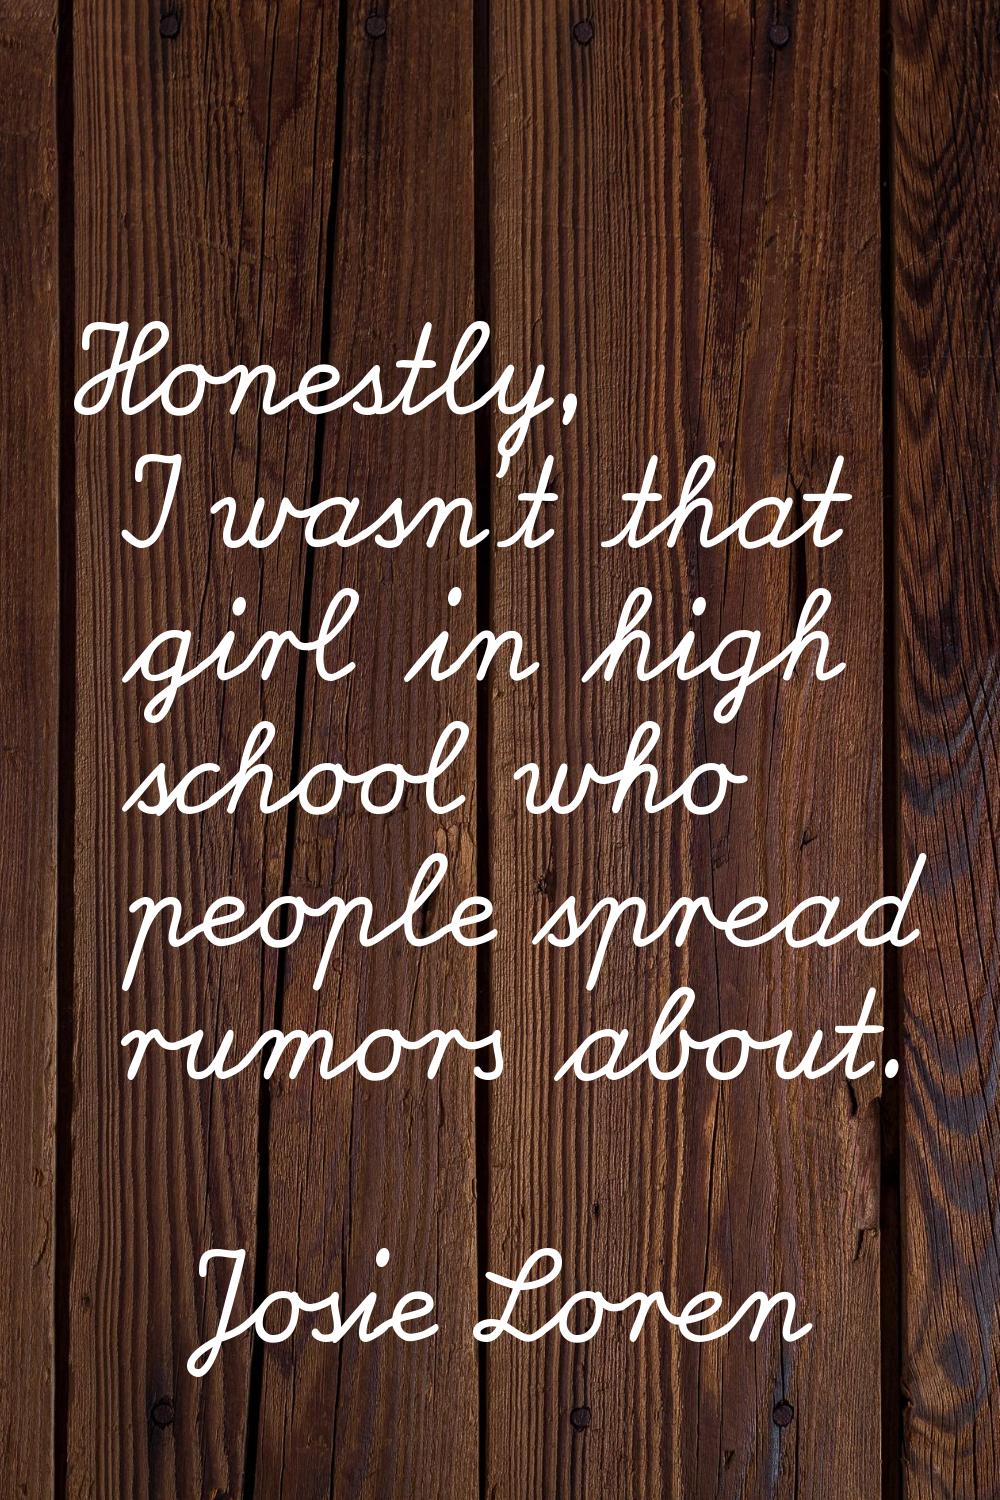 Honestly, I wasn't that girl in high school who people spread rumors about.